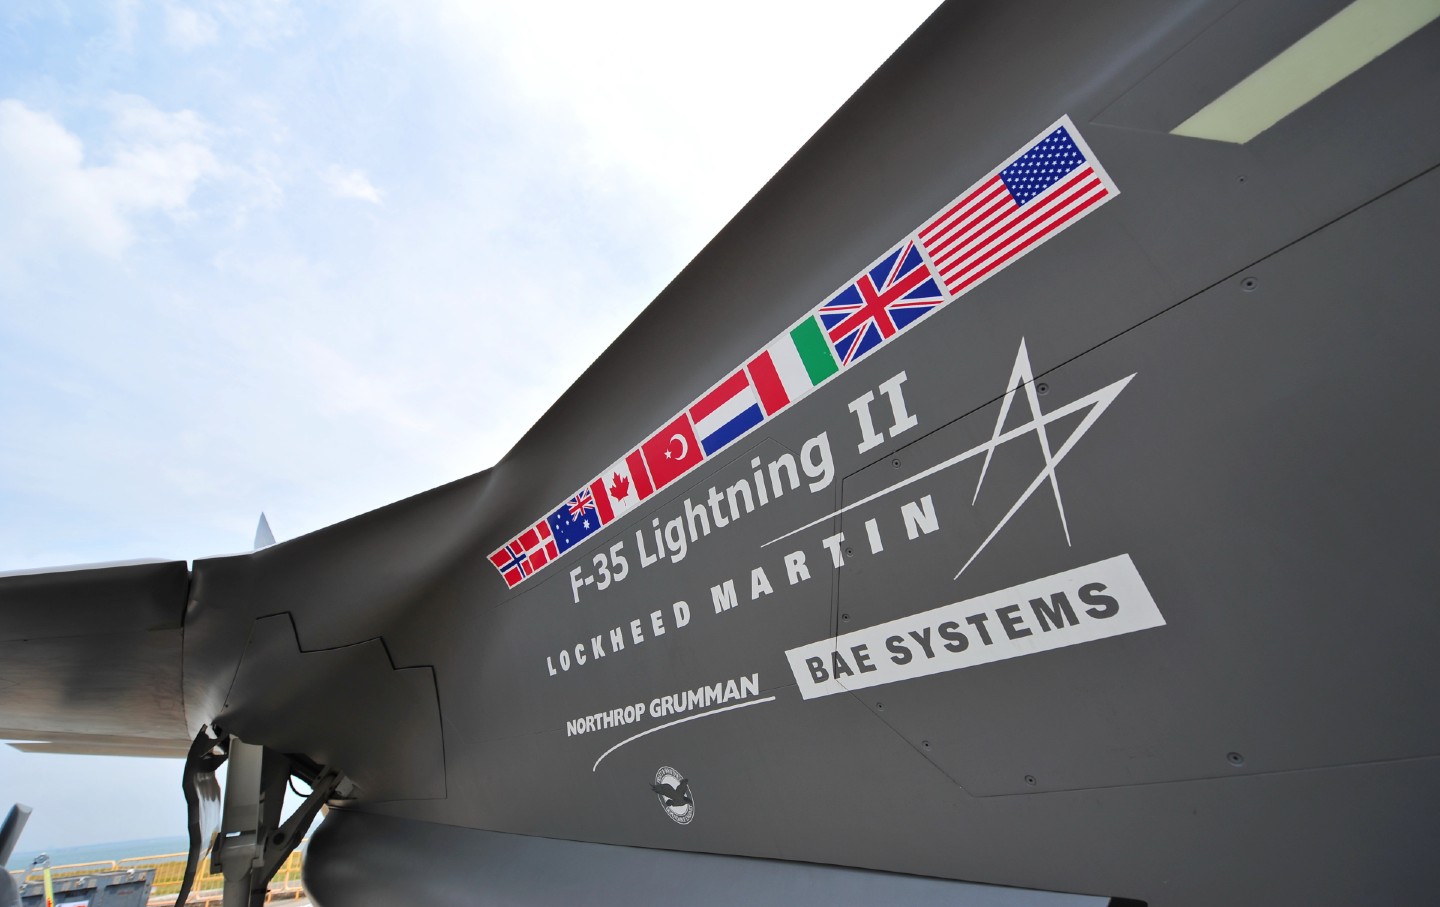 A Lockheed Martin F-35 Lightning fighter jet is shown at the Singapore Airshow in 2014